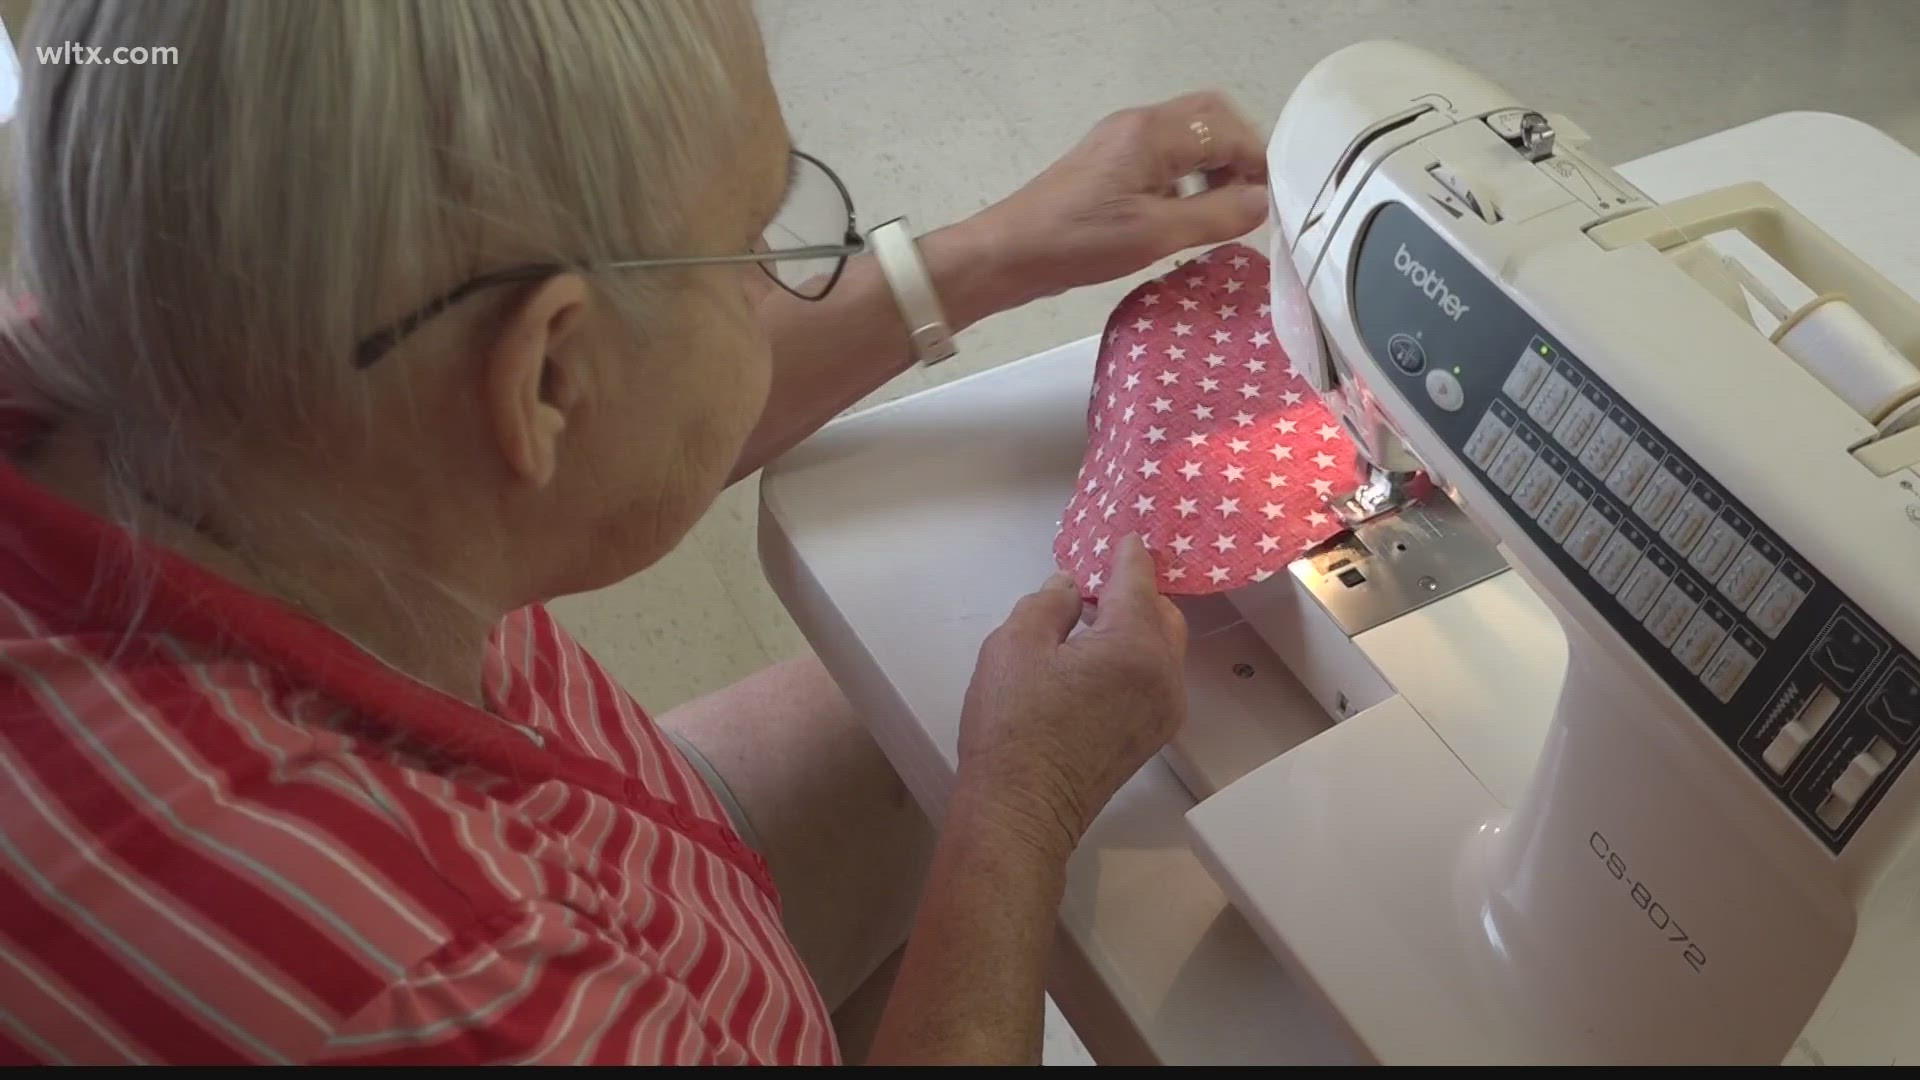 A local non-profit in Lexington is using their home-ec skills to honor service men and women.